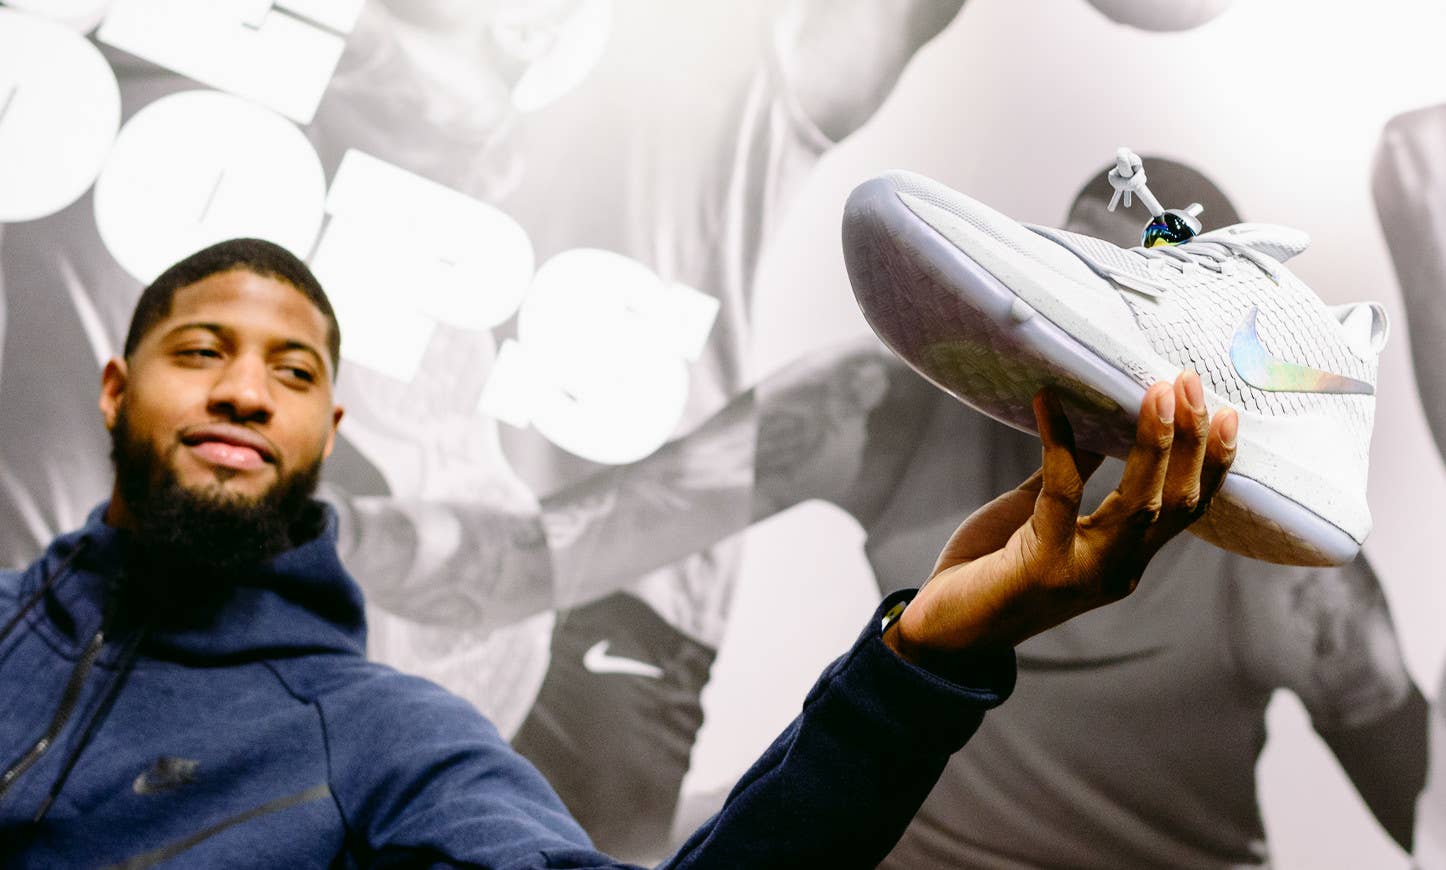 Watch Paul George Speak About His First Nike Signature Shoe